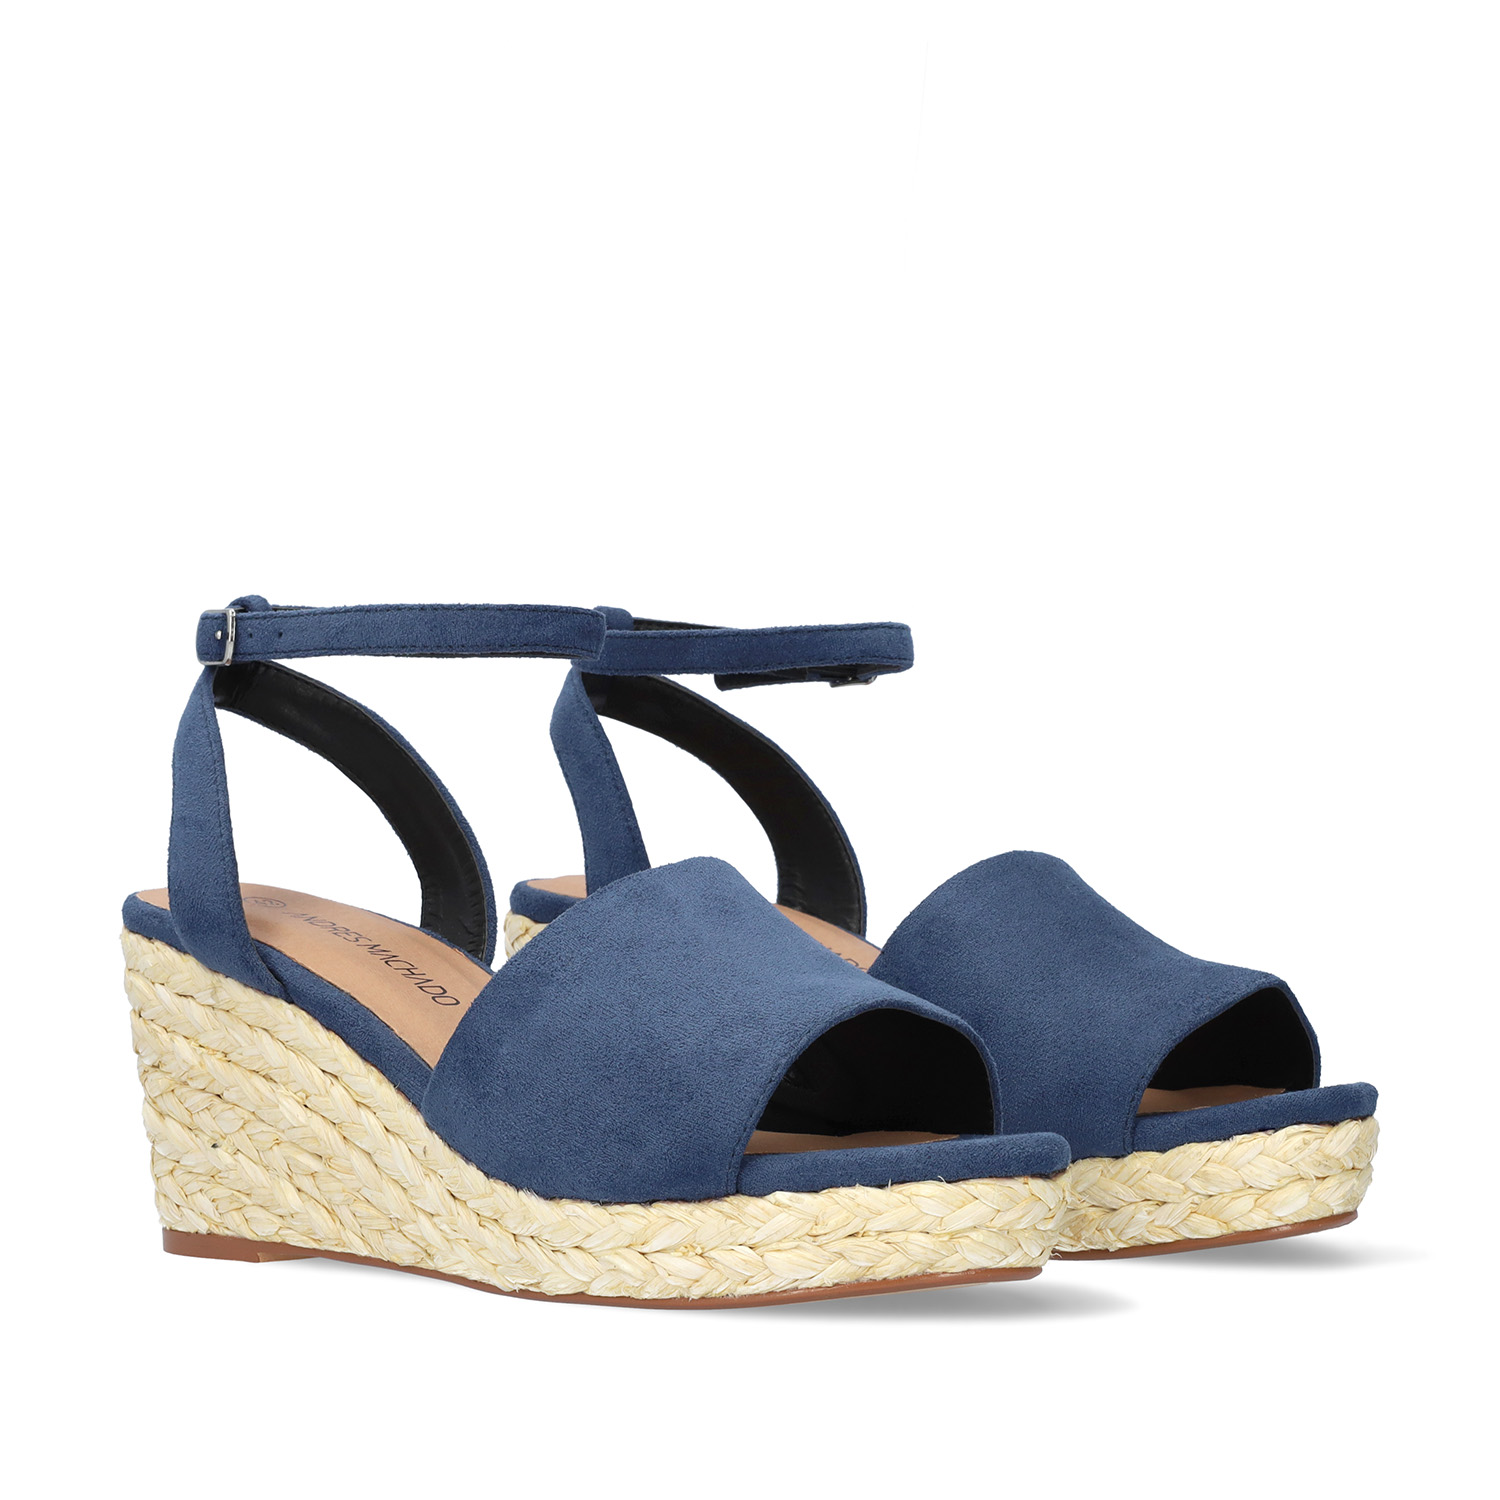 Blue faux suede sandal with a jute wedge 